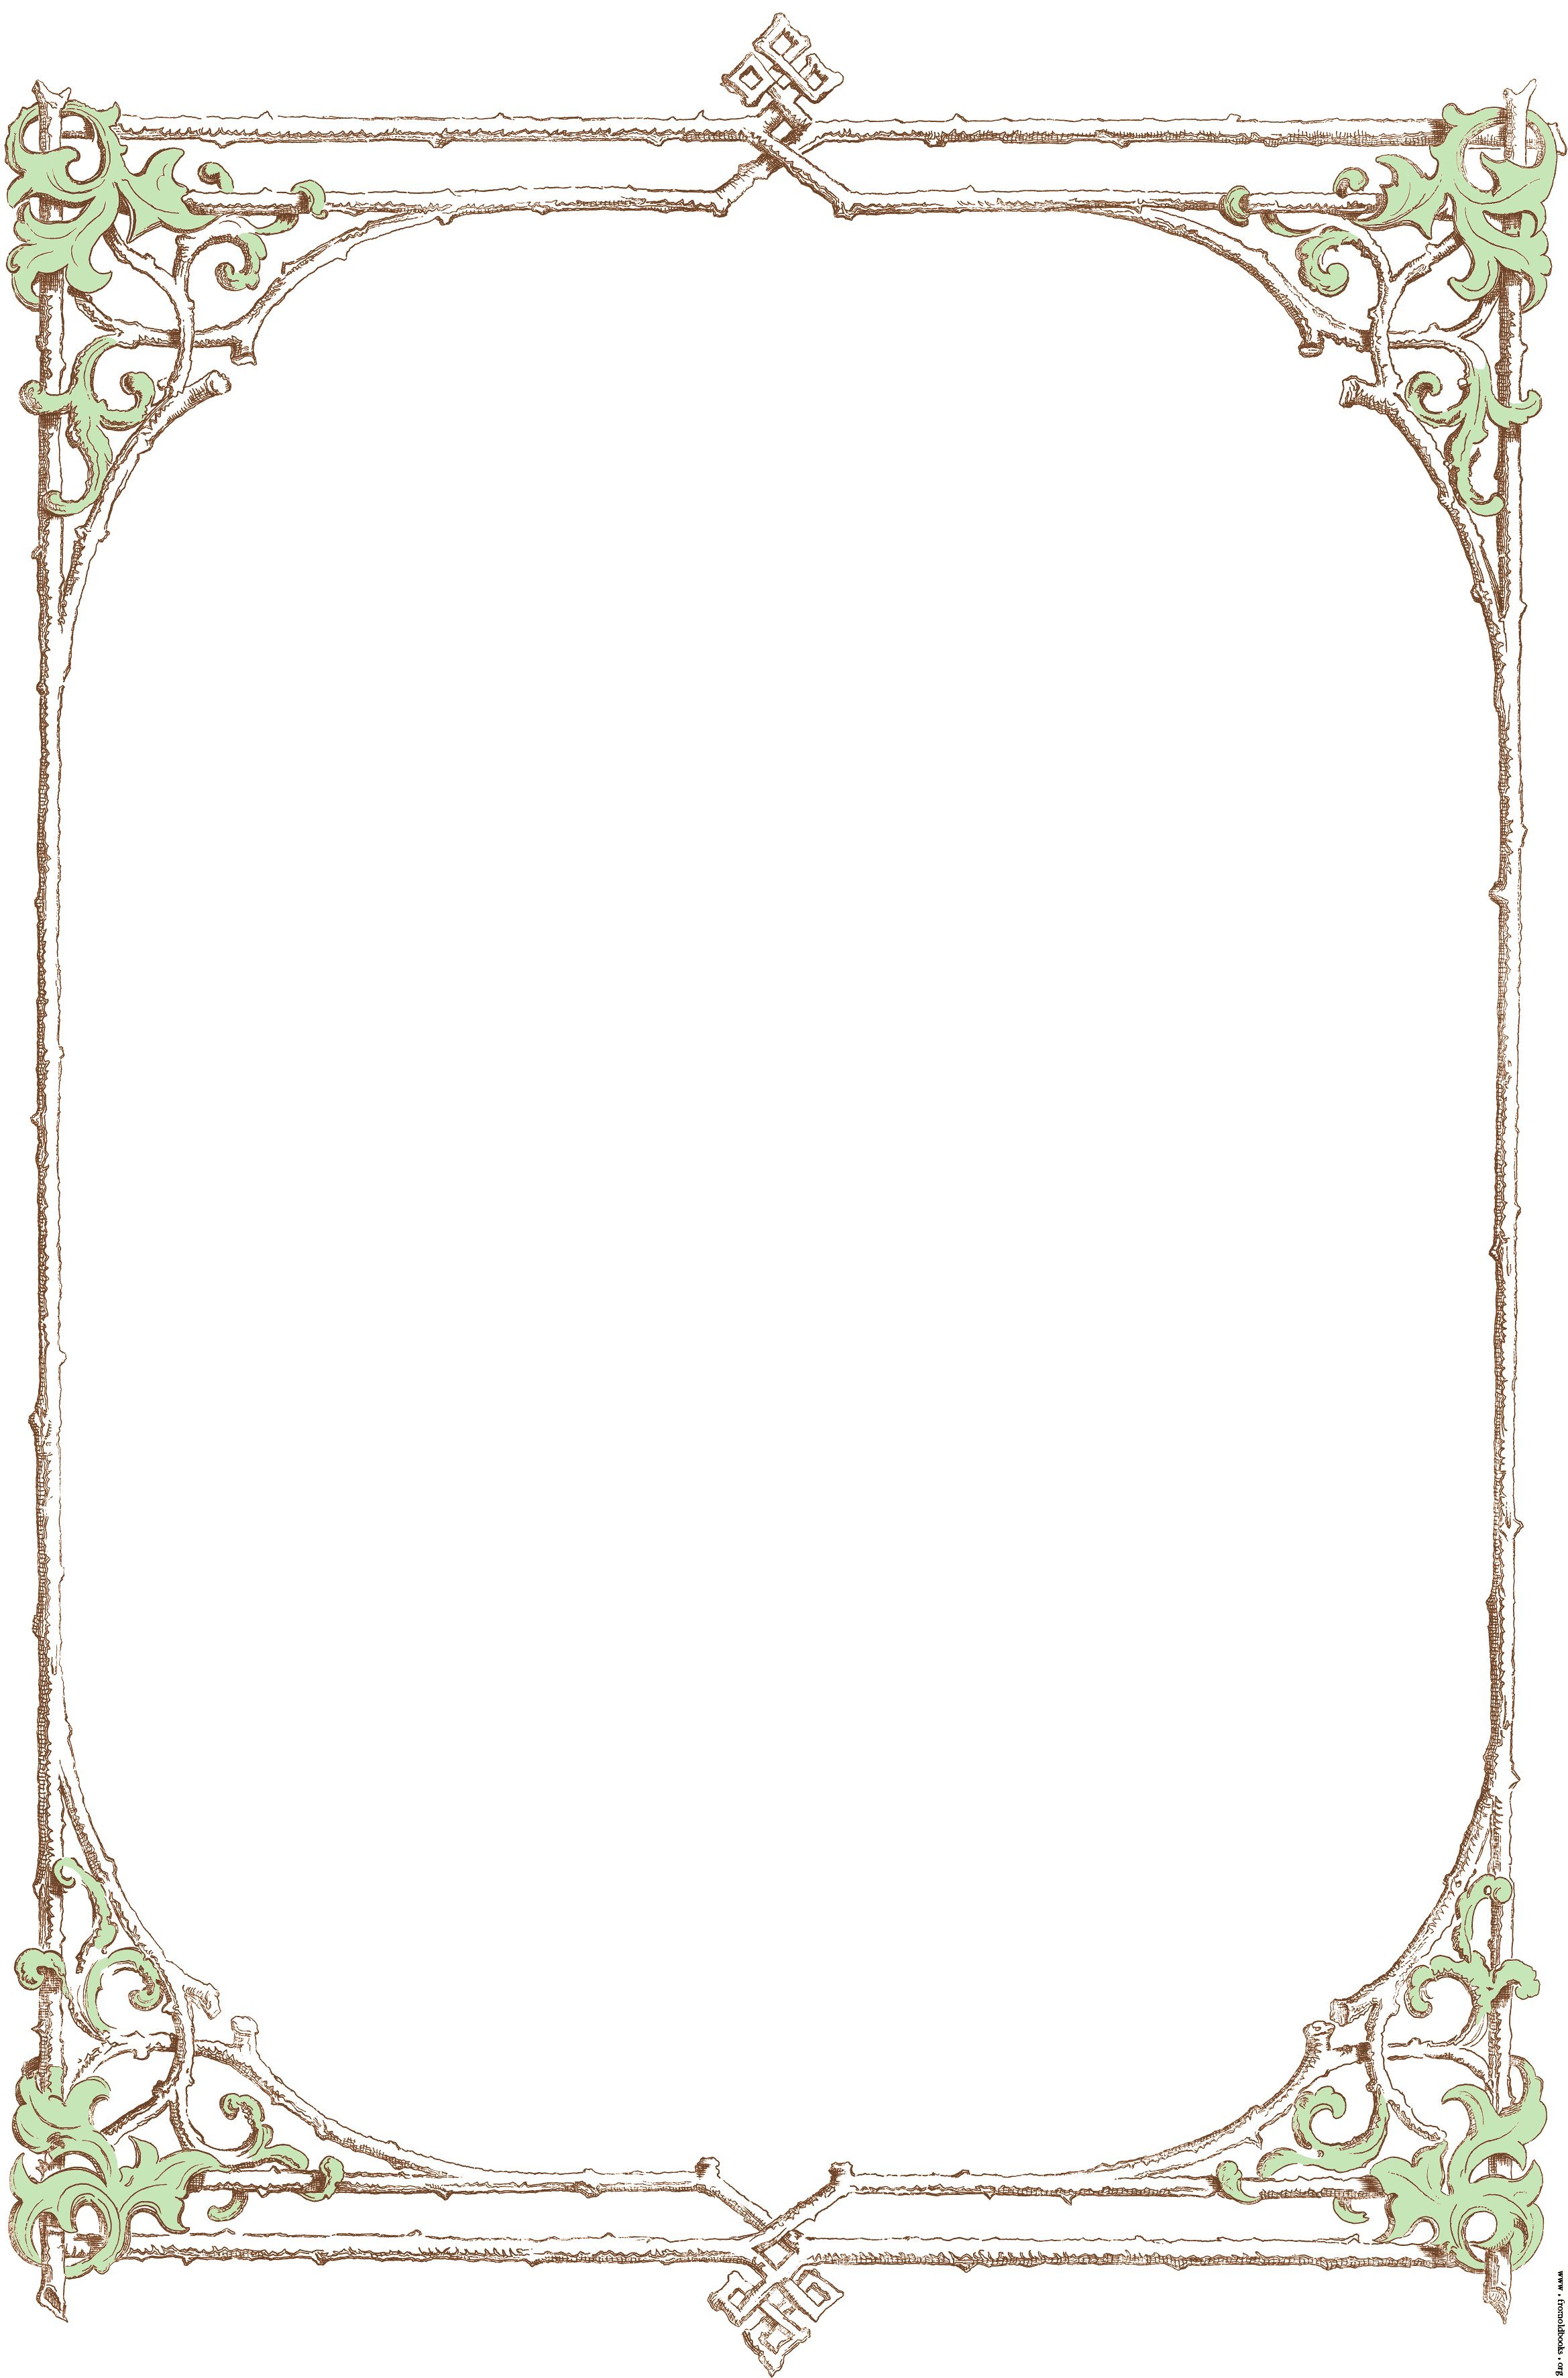 Free Victorian Frame Cliparts, Download Free Clip Art, Free